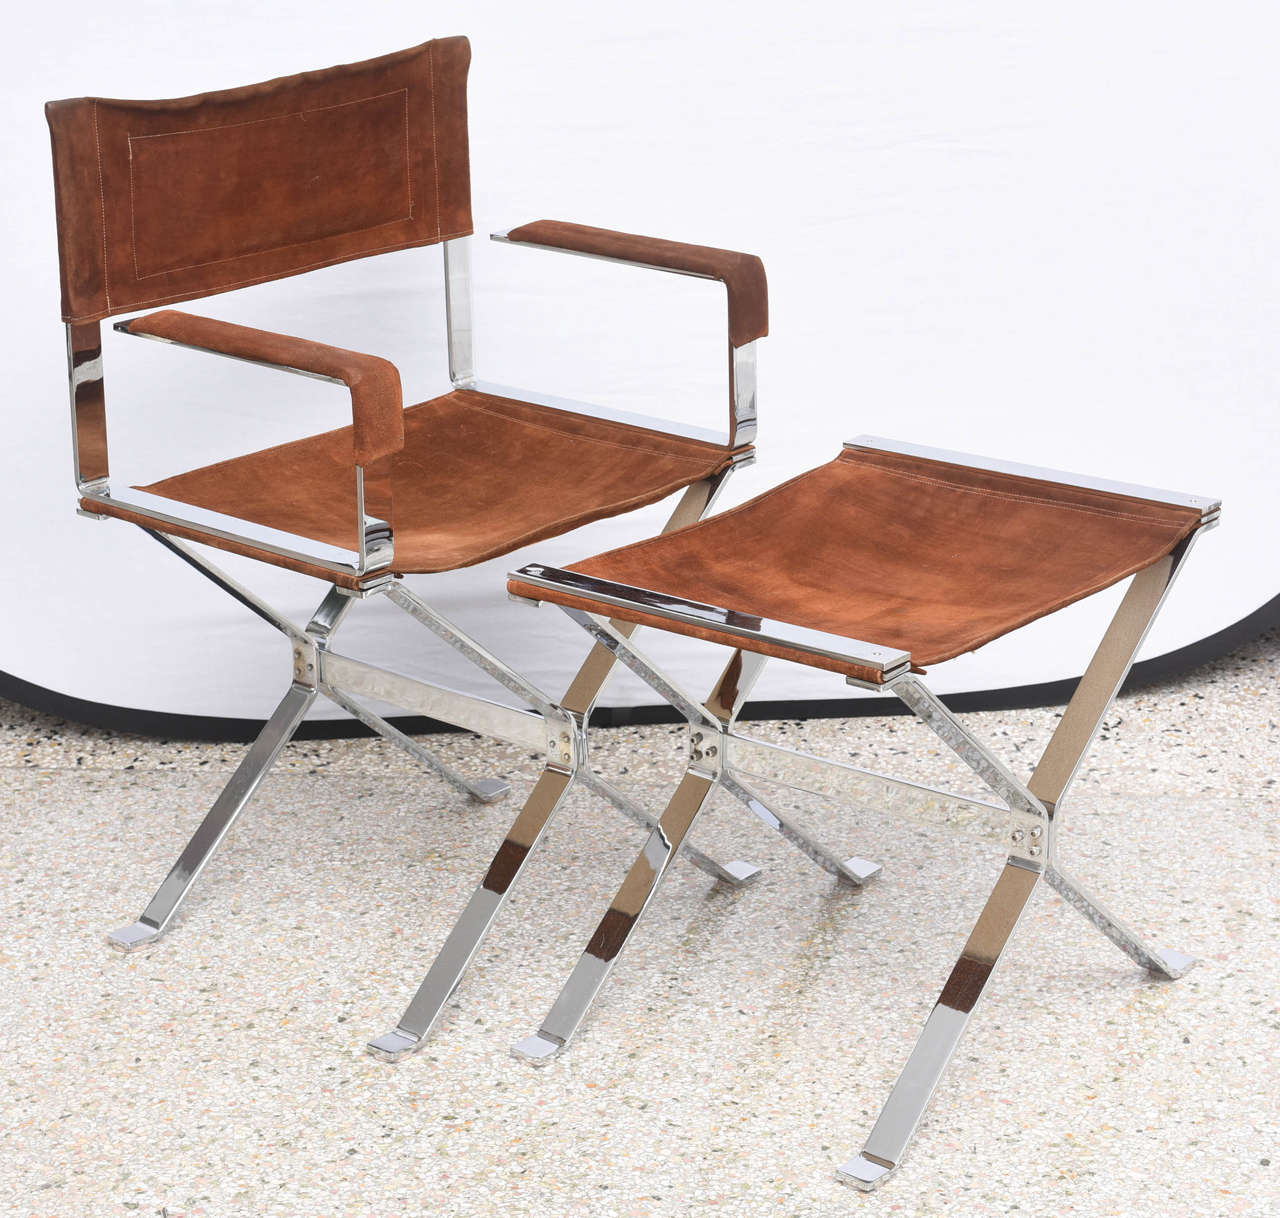 This pair of chairs were produced in the 1960s by the iconic furniture designer Alessandro Albrizzi  and are the height of Mid-Century European design.  The polished steel frames are softened by the use of cognac colored suede that has aged to a